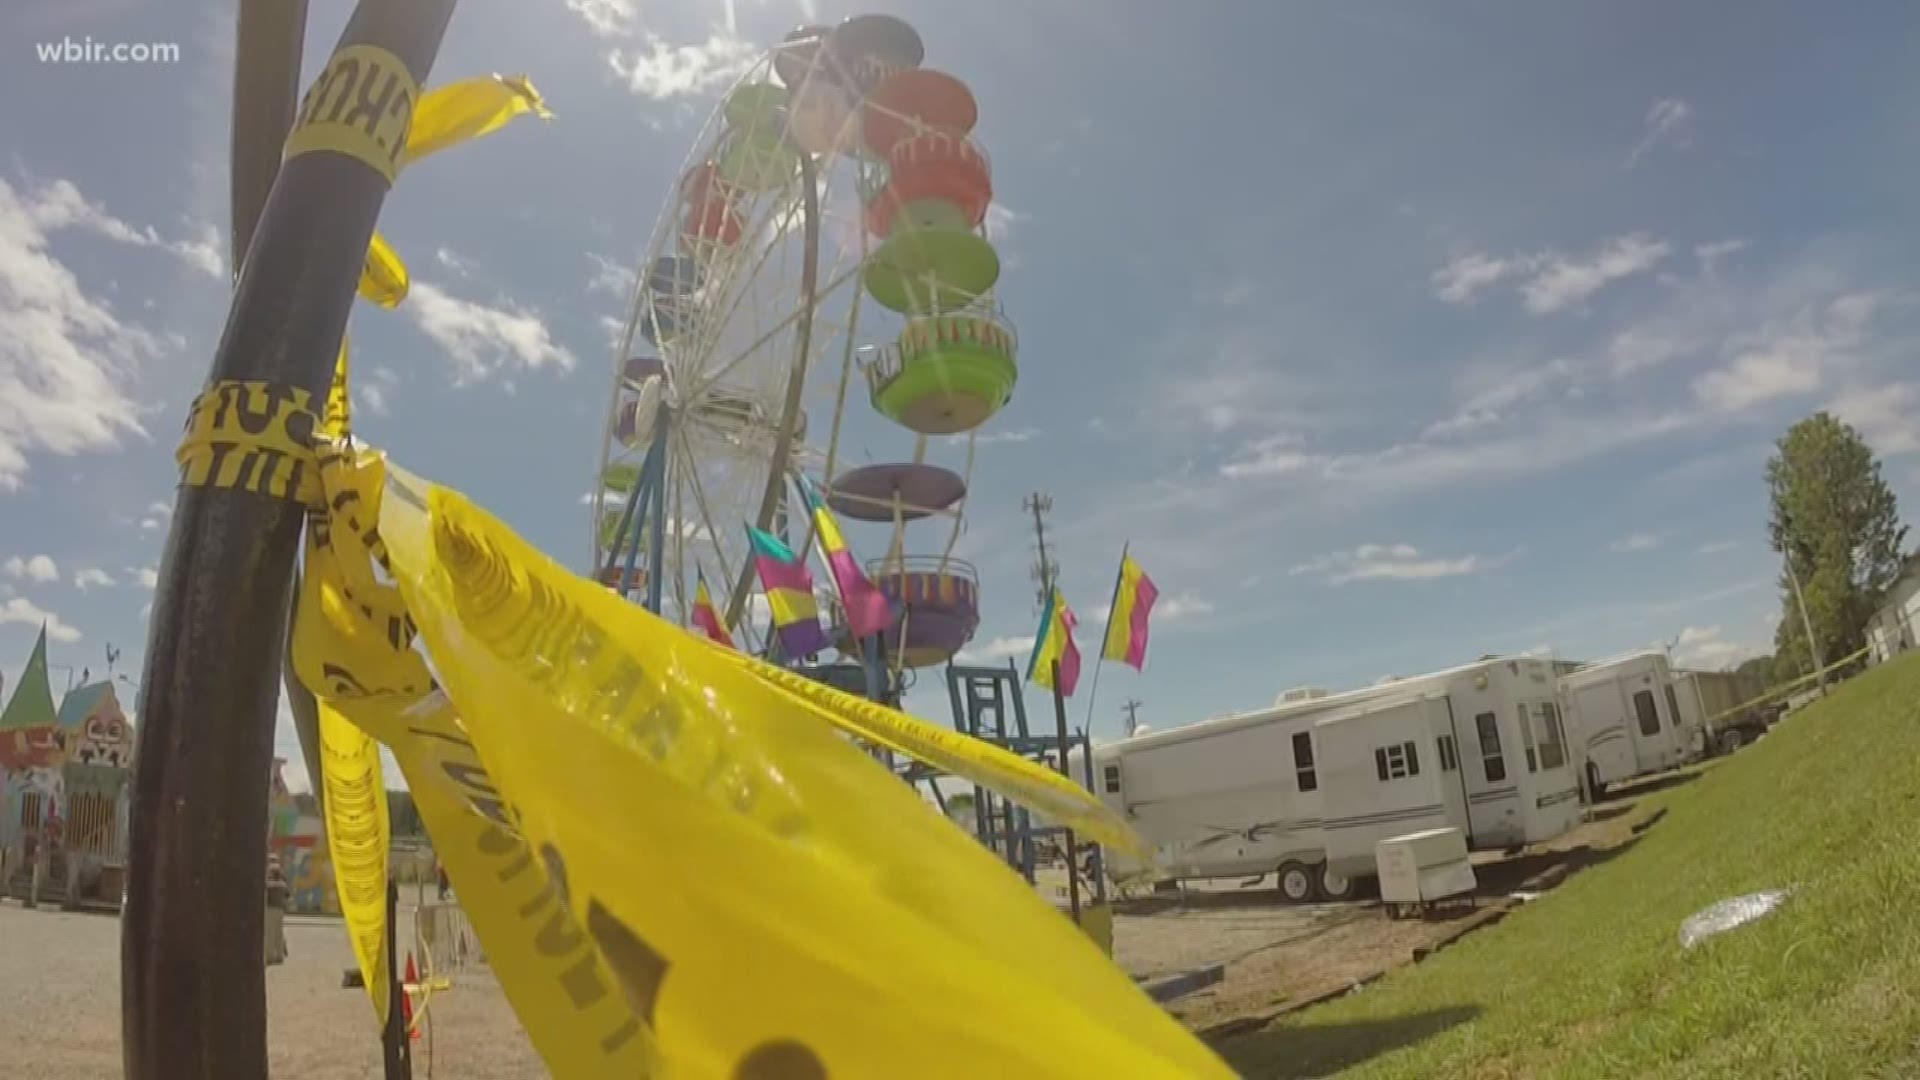 The victims' families and ride providers have now reached a settlement. In 2016, three girls were hurt when their Ferris wheel gondola tipped over -- causing them to fall 40 feet. In 2017, they filed a personal injury suit against a Georgia-based Family A